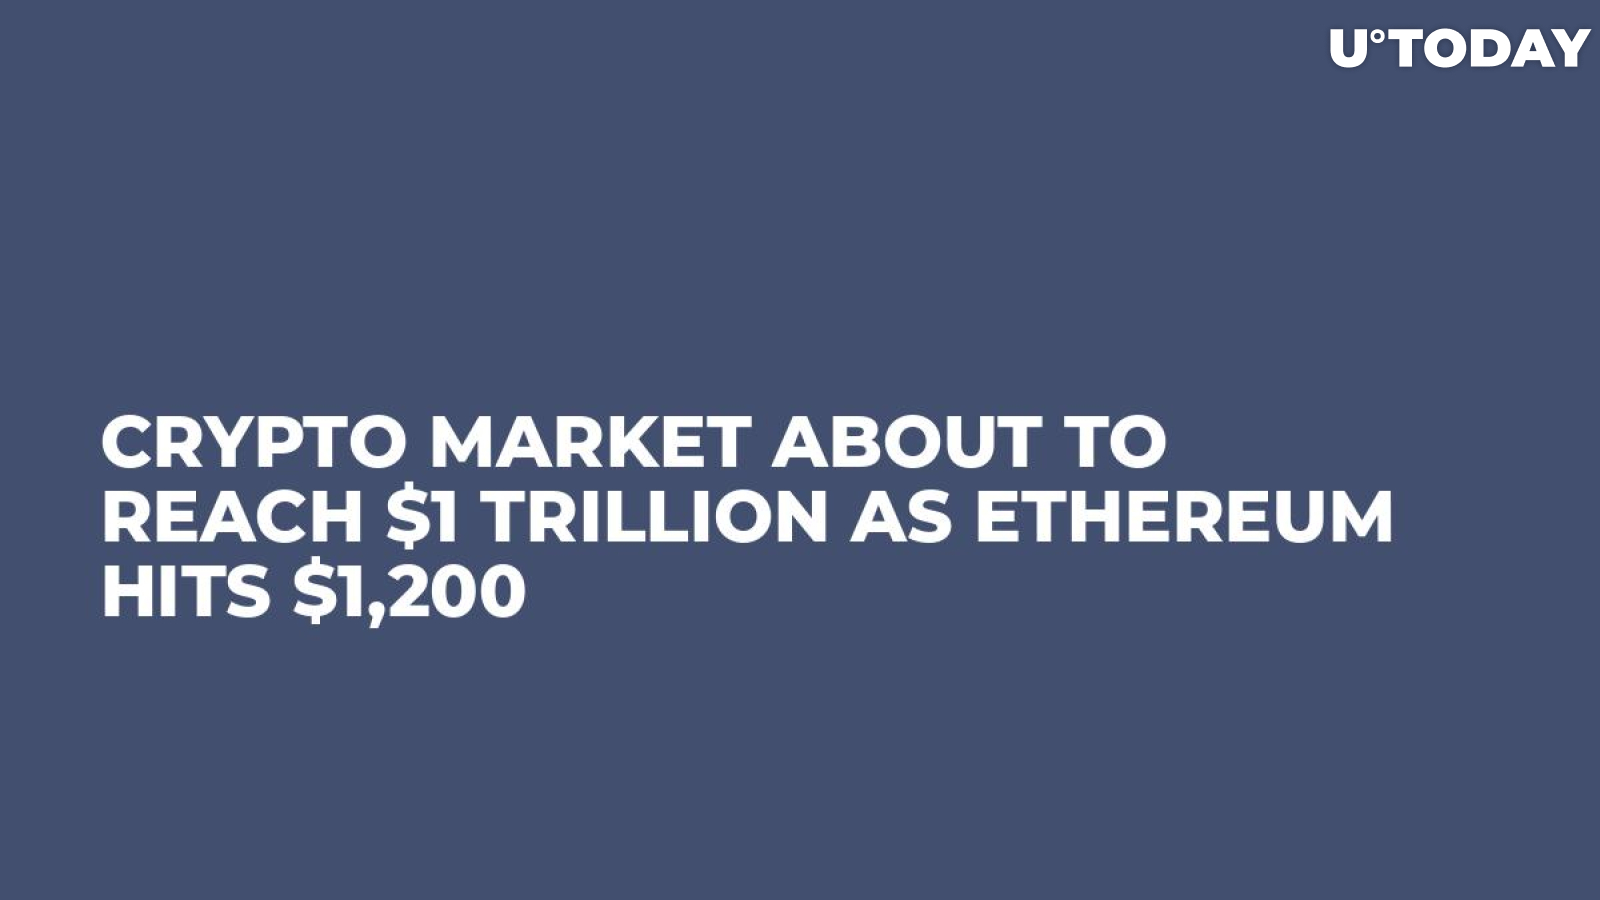 Crypto Market About to Reach $1 Trillion as Ethereum Hits $1,200